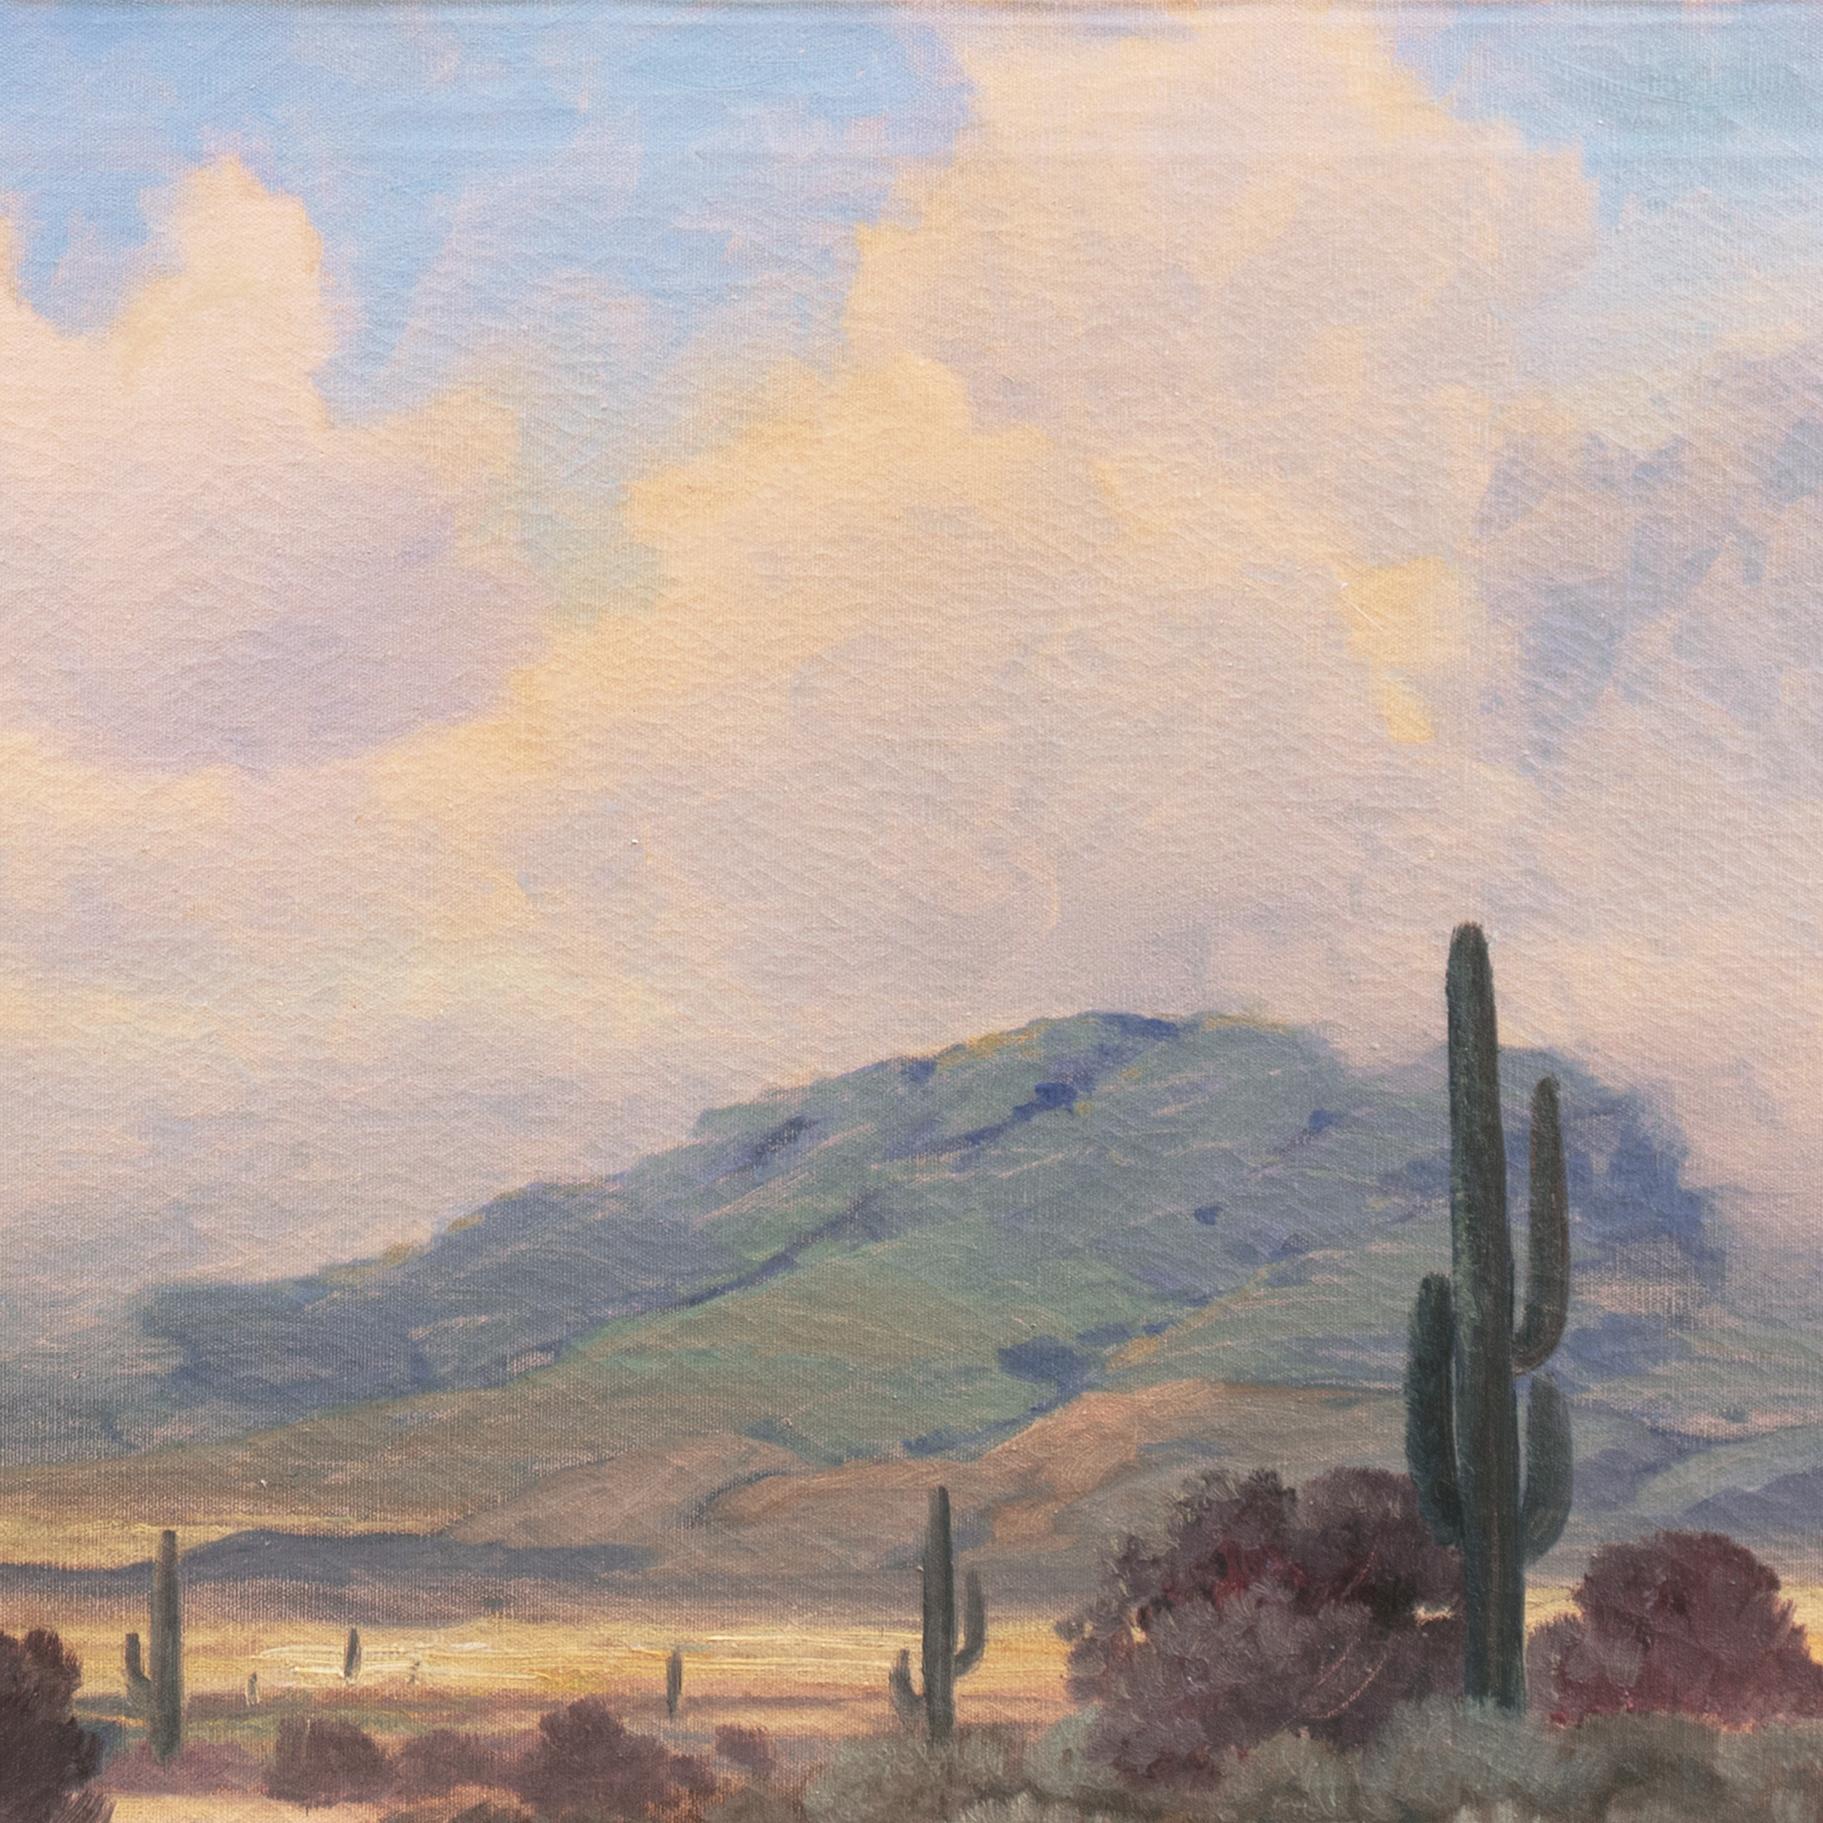 'Southern California Desert Landscape', Art Institute of Chicago, Who Was Who - Realist Painting by George Sanders Bickerstaff